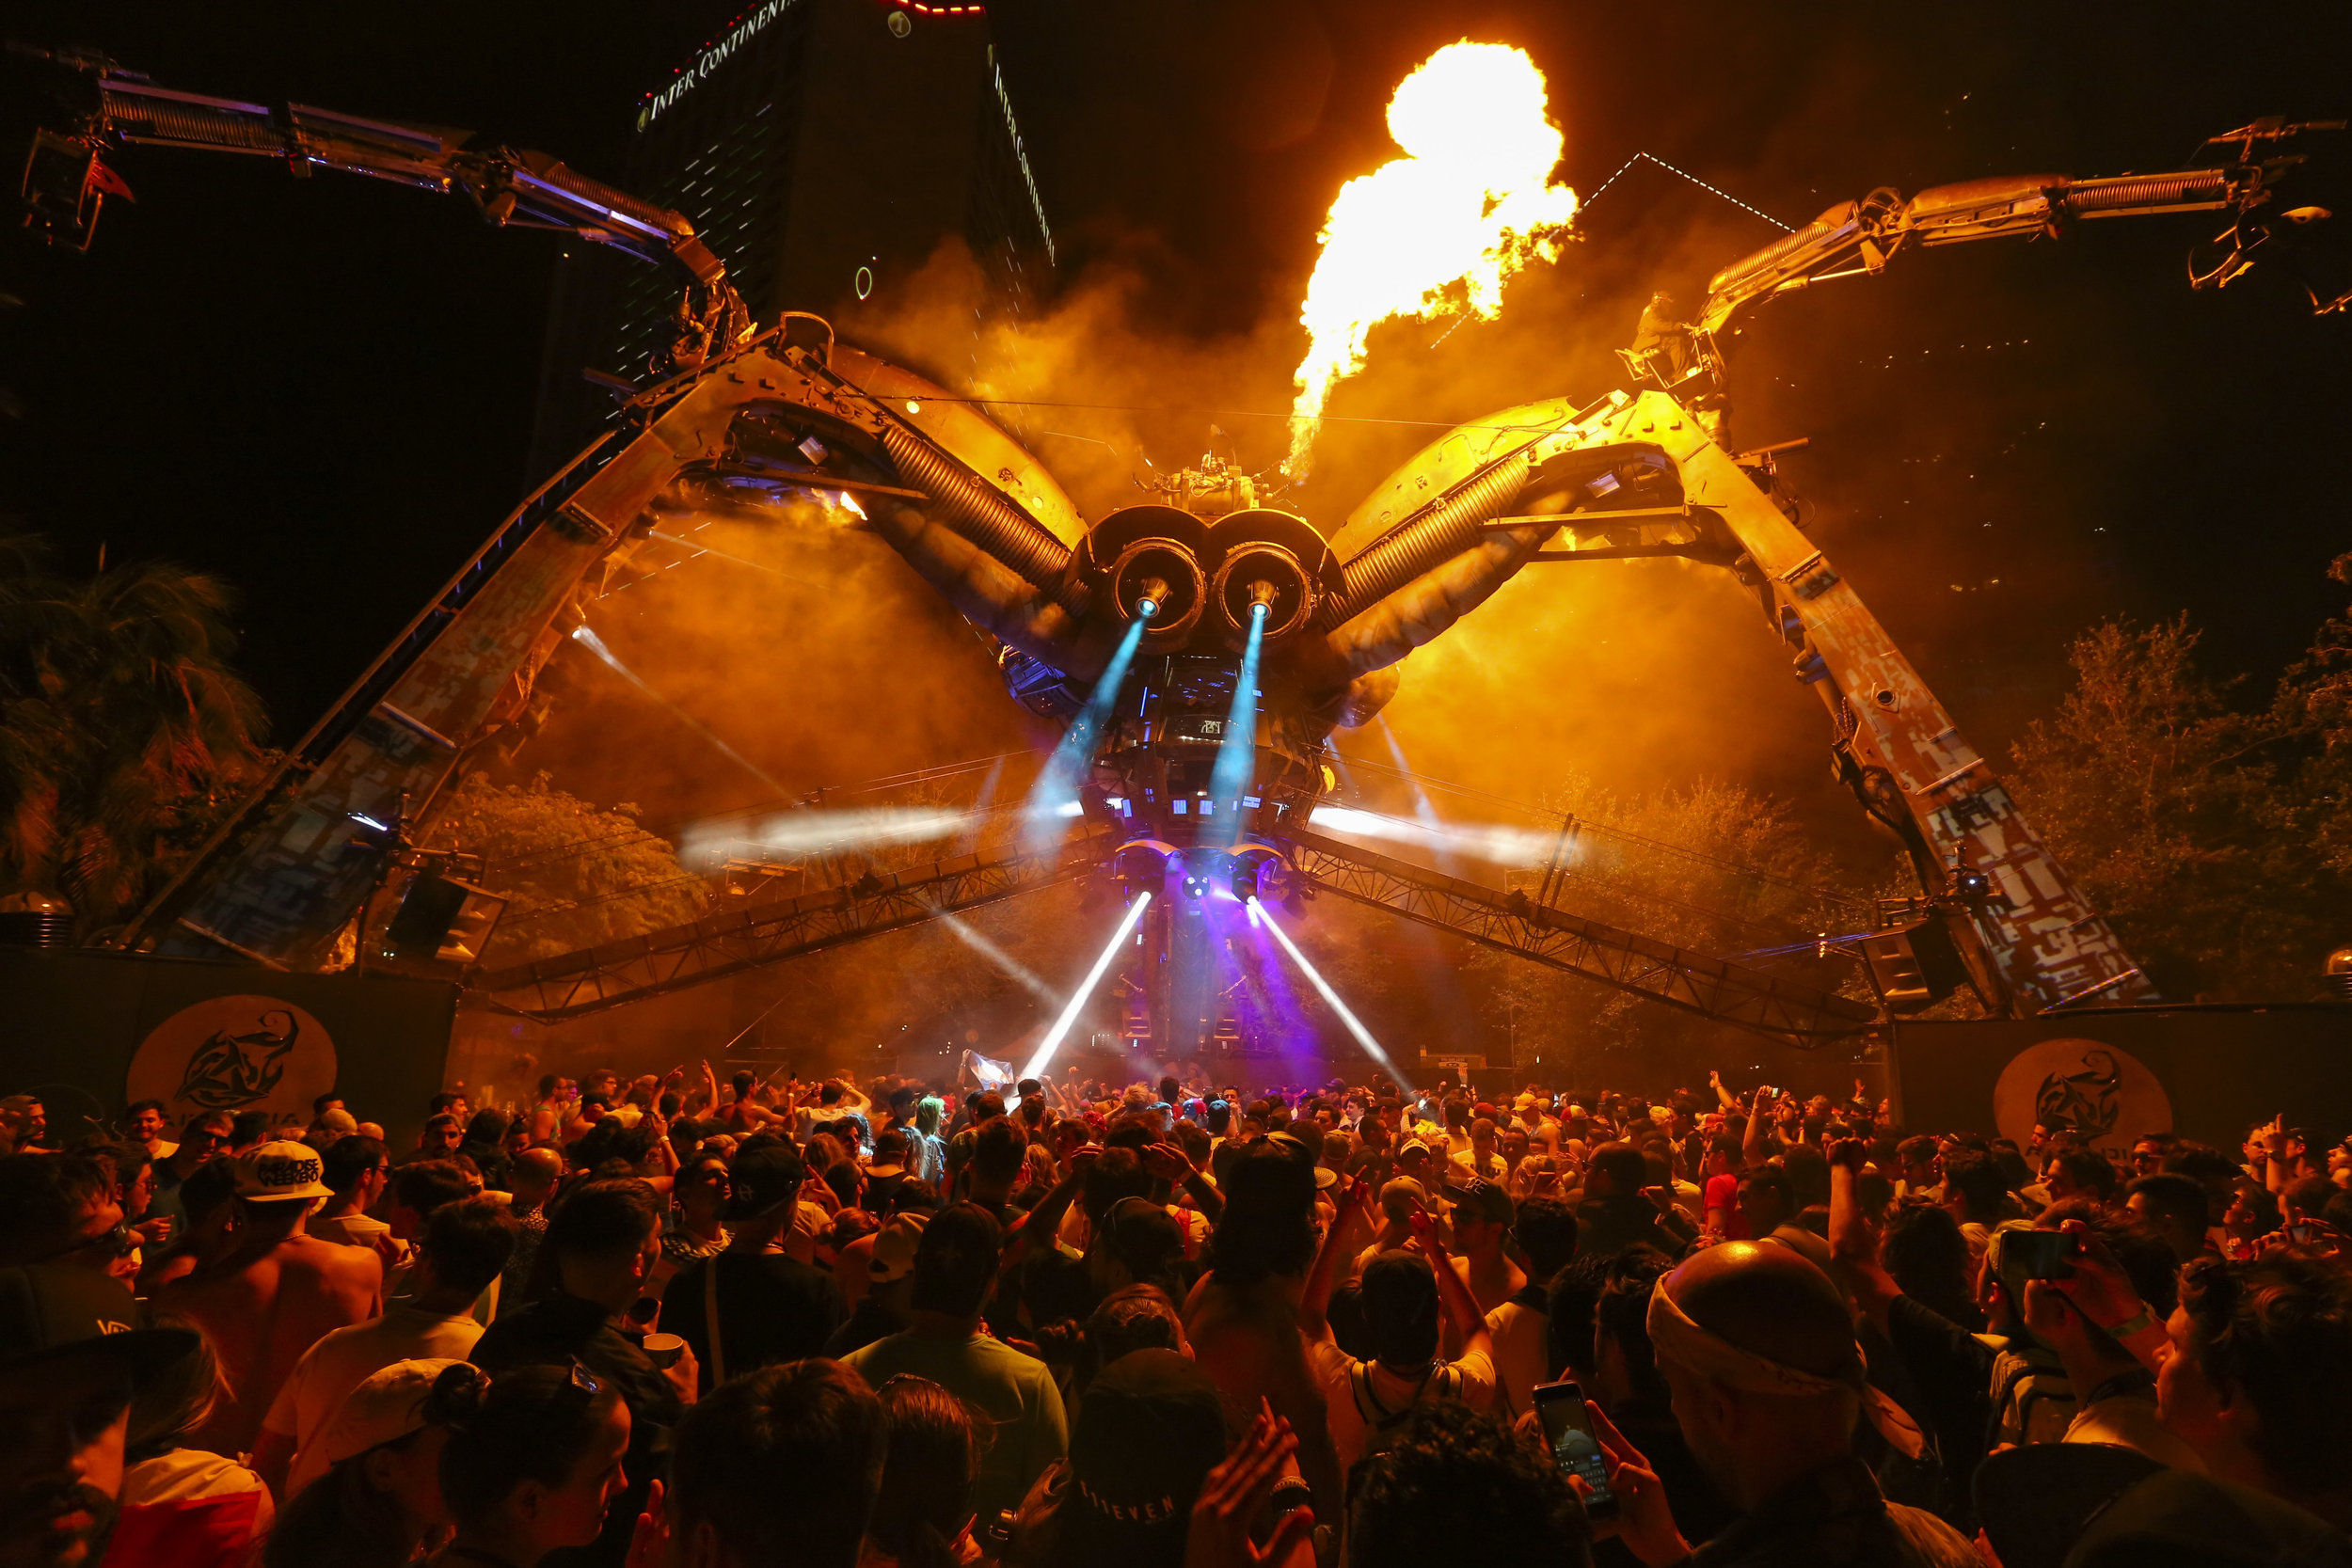  DJ Maceo Plex performs on the Arcadia Spider during the first day of the Ultra Music Festival in Bayfront Park on Friday, March 24, 2017. 